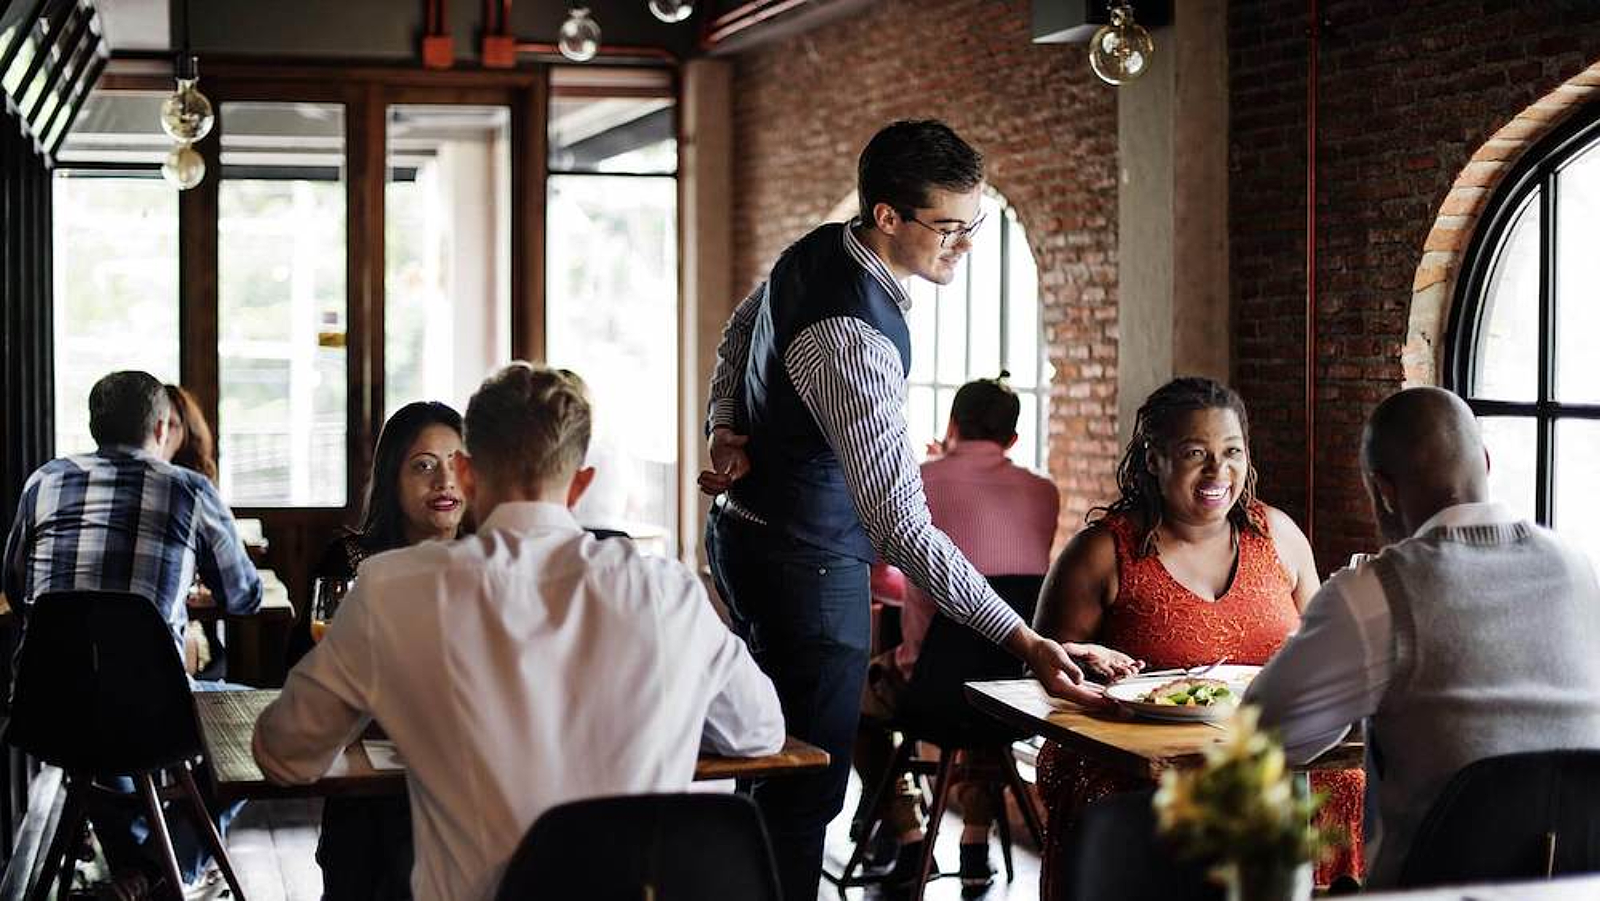 How to become a restaurant manager